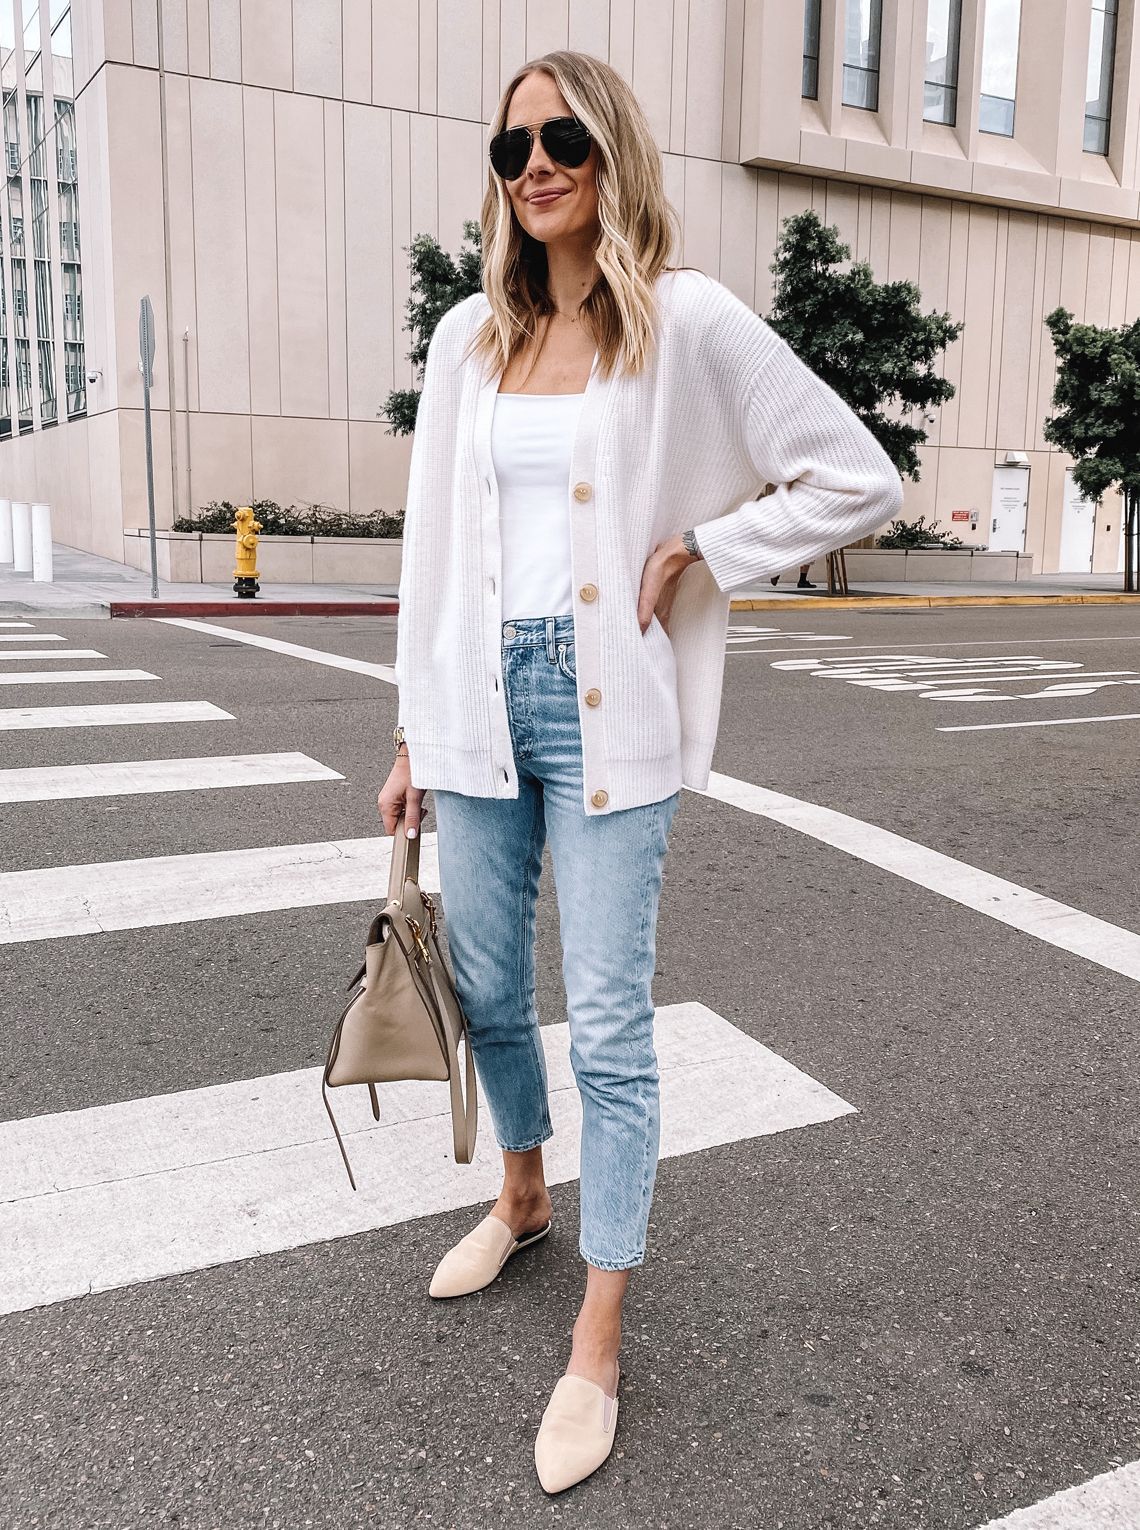 Celine mini belt bag, beige mules, spring mules, mules shoes outfit, how to wear mules, mules flats - Celine mini belt bag, beige mules, spring mules, mules shoes outfit, how to wear mules, mules flats -   17 style Simple jeans ideas